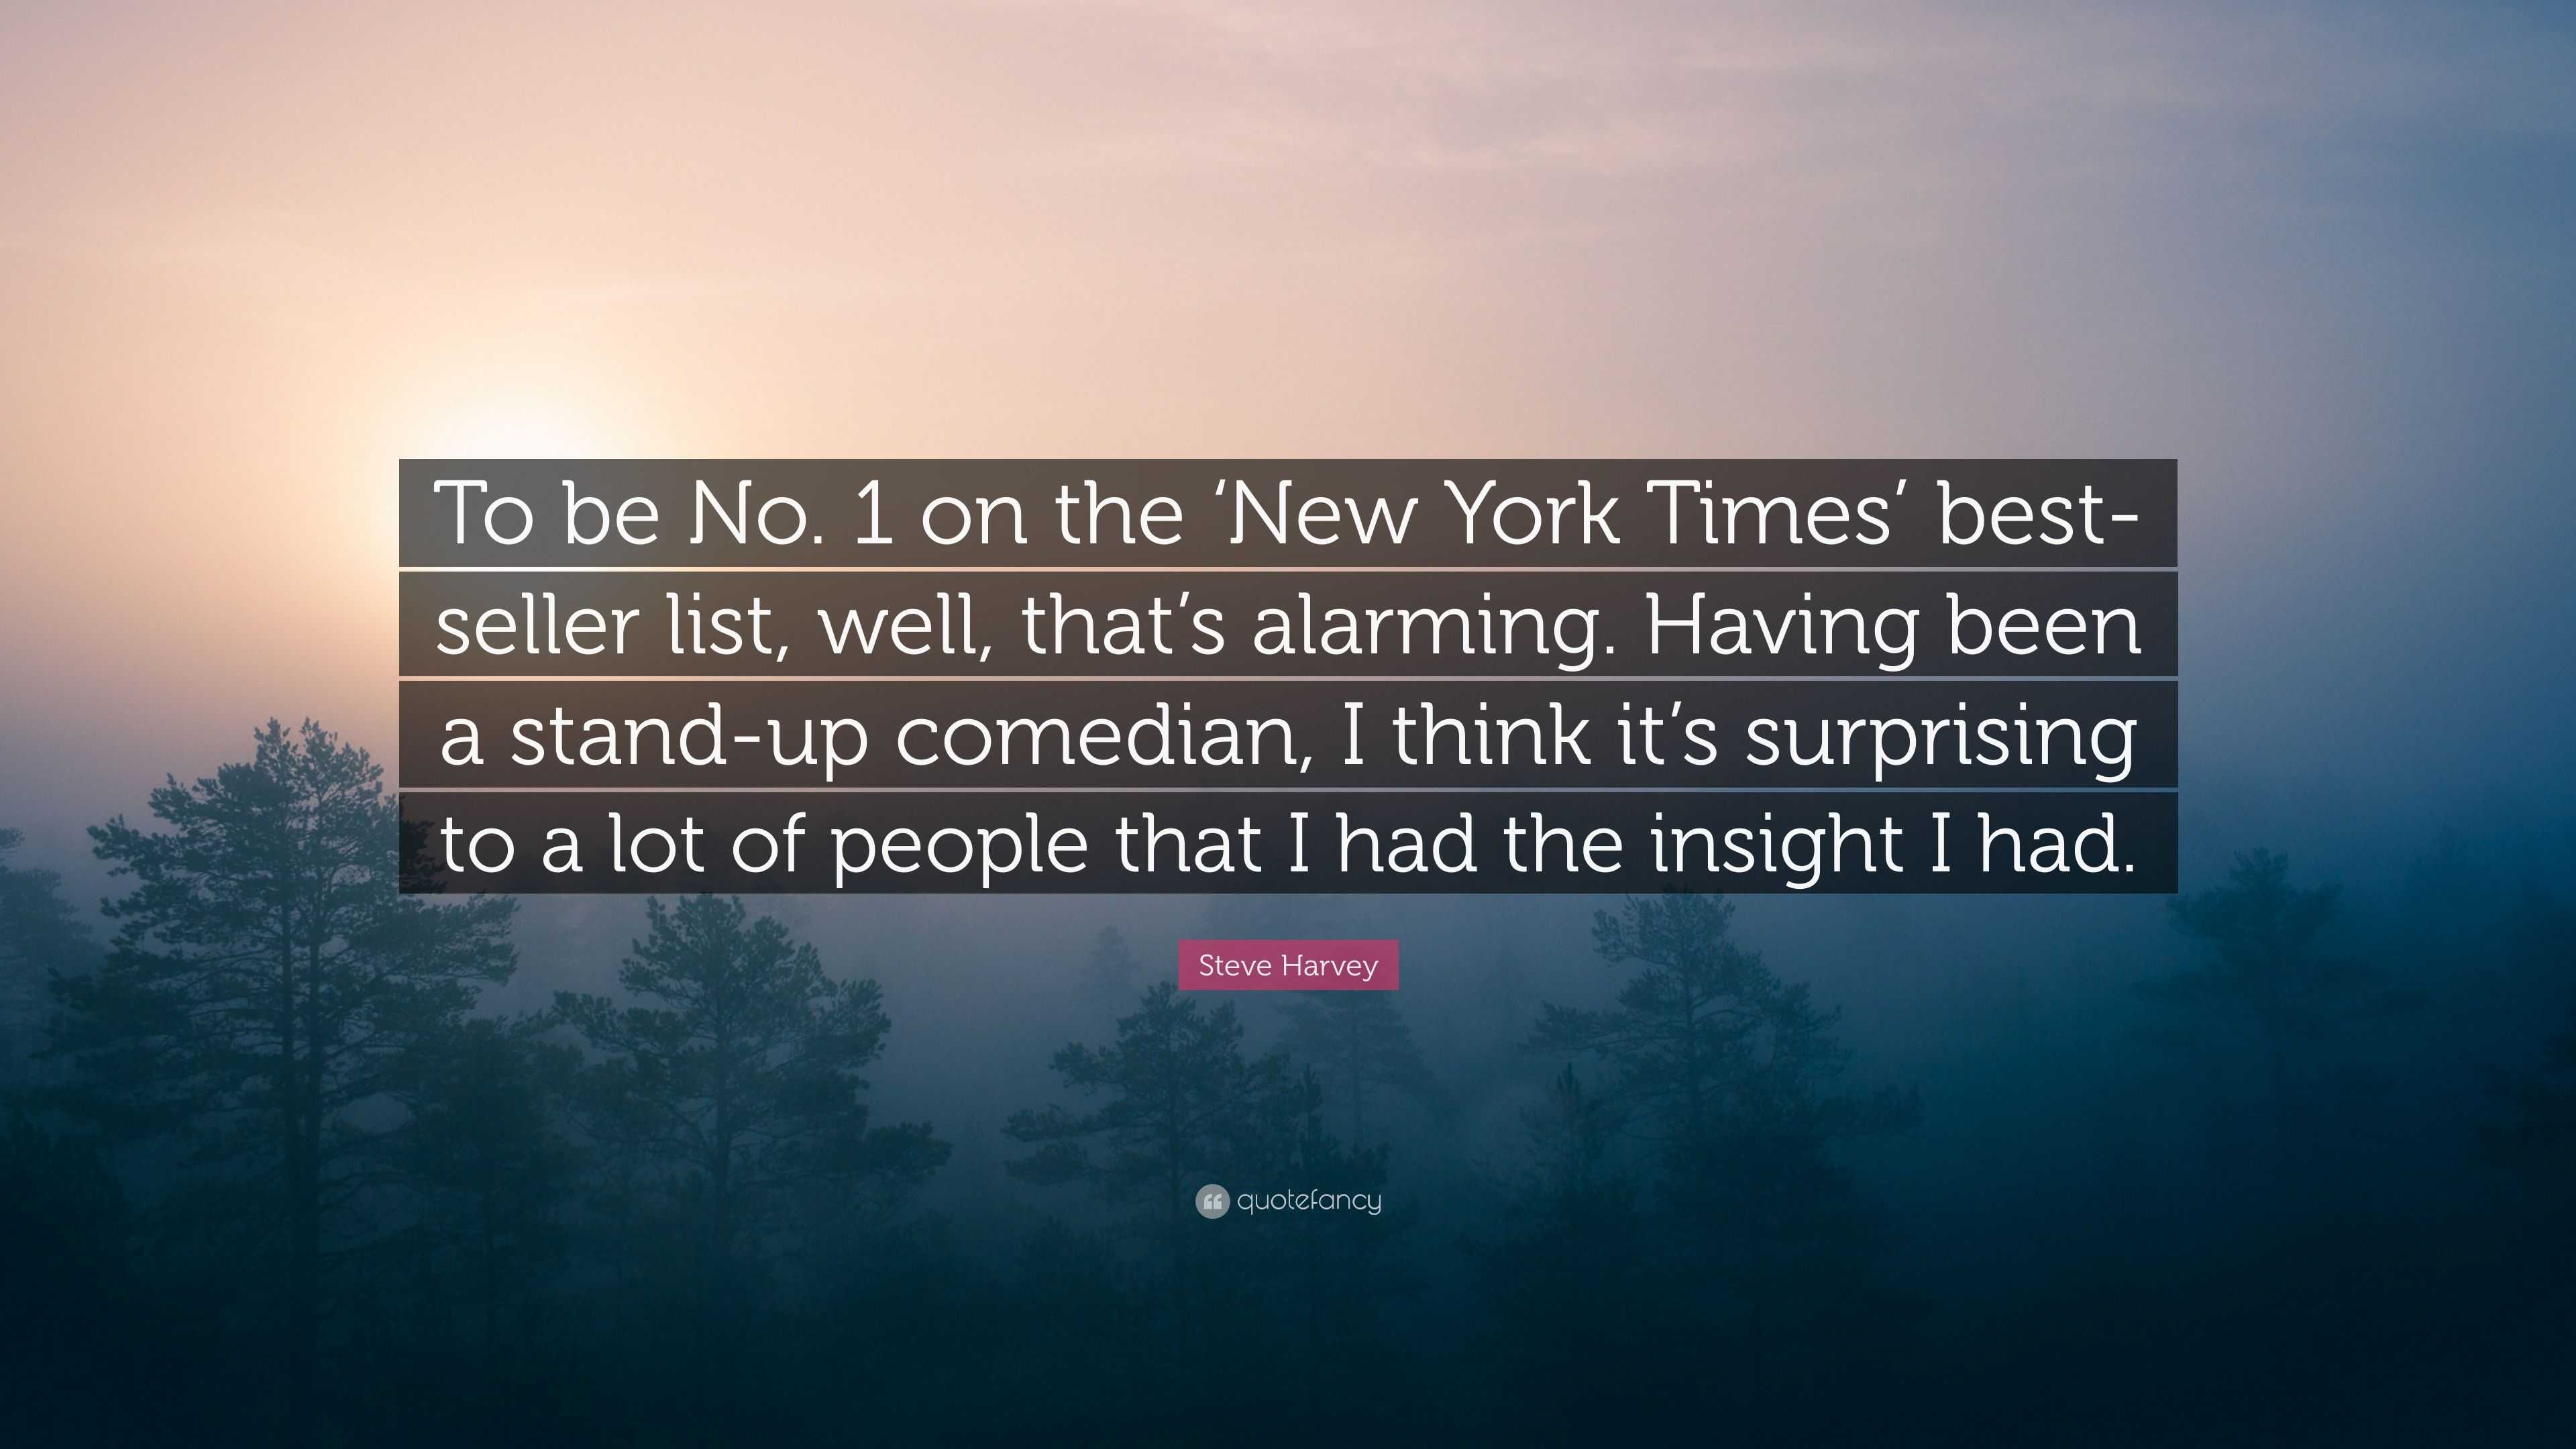 Steve Harvey Quote: “To be No. 1 on the 'New York Times' best